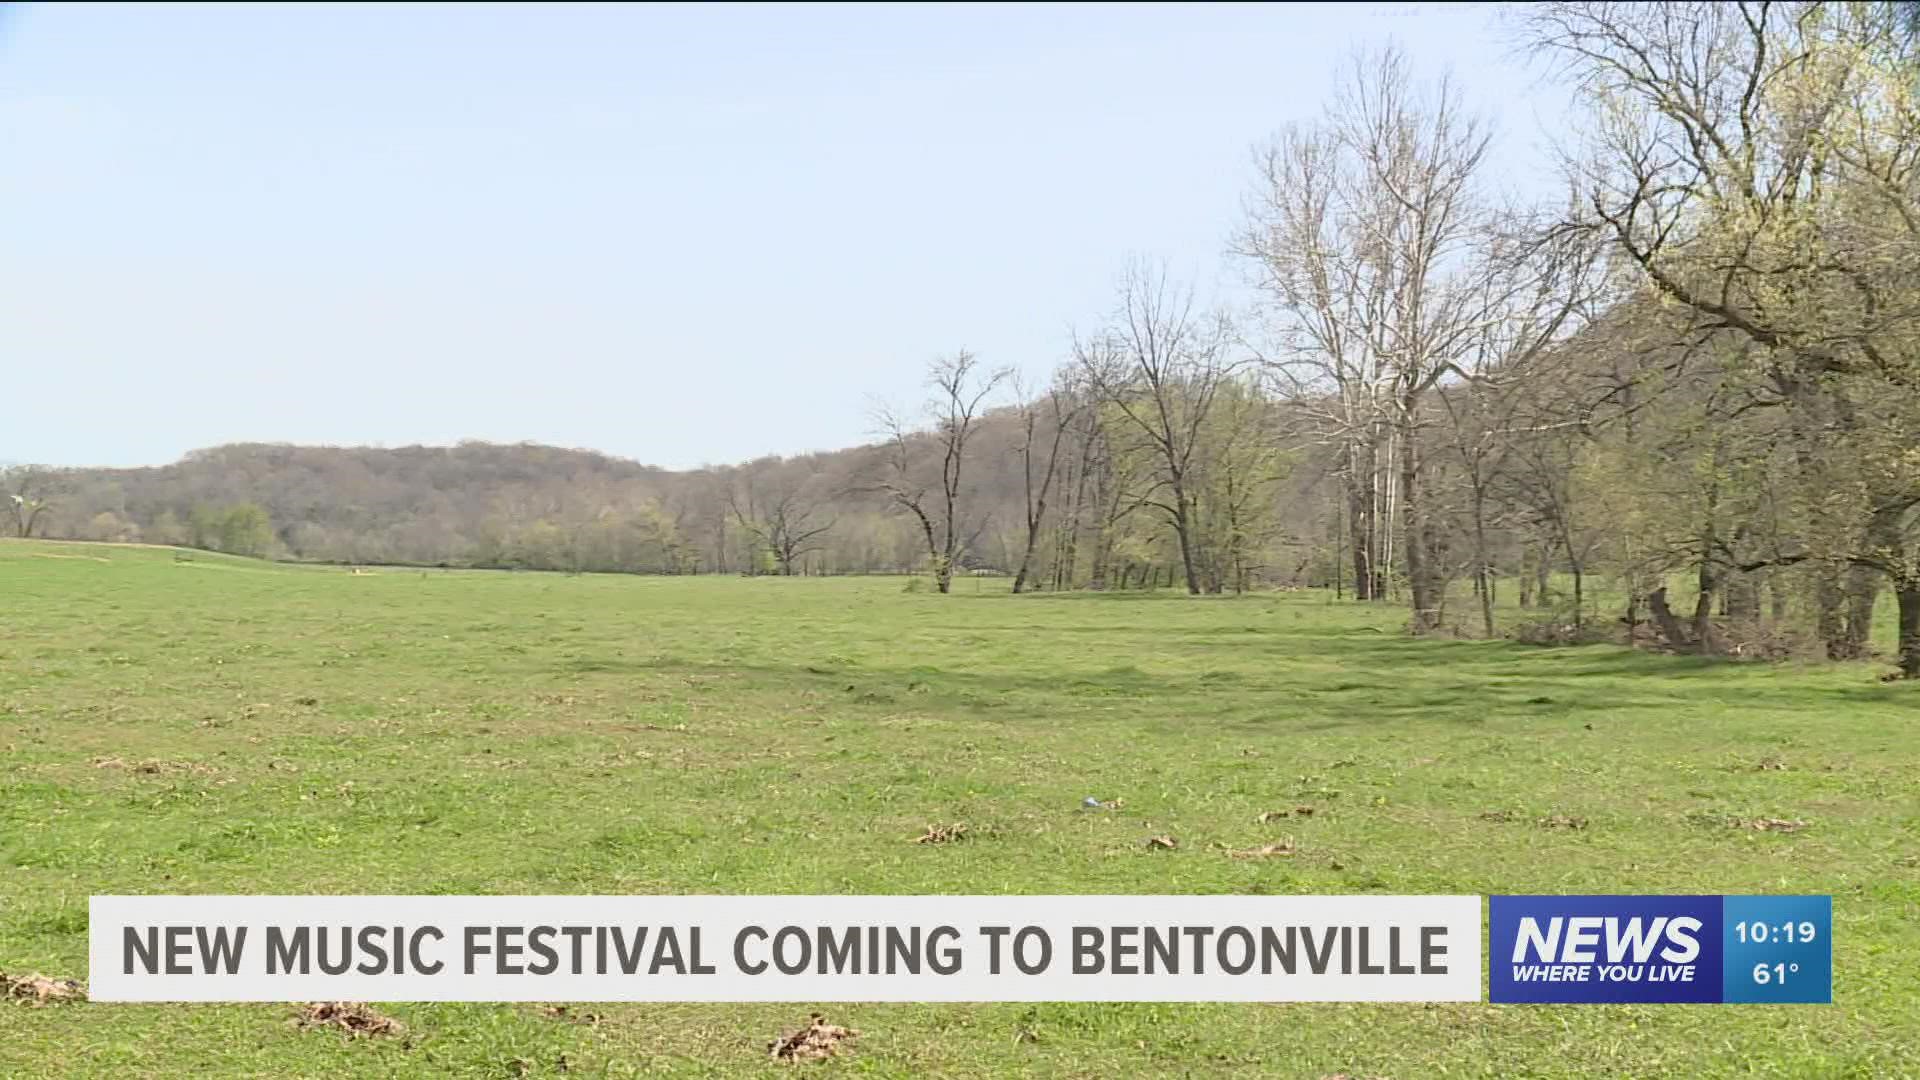 The festival will collide the worlds of music, art and technology in Bentonville with more than 50 artists set to perform.